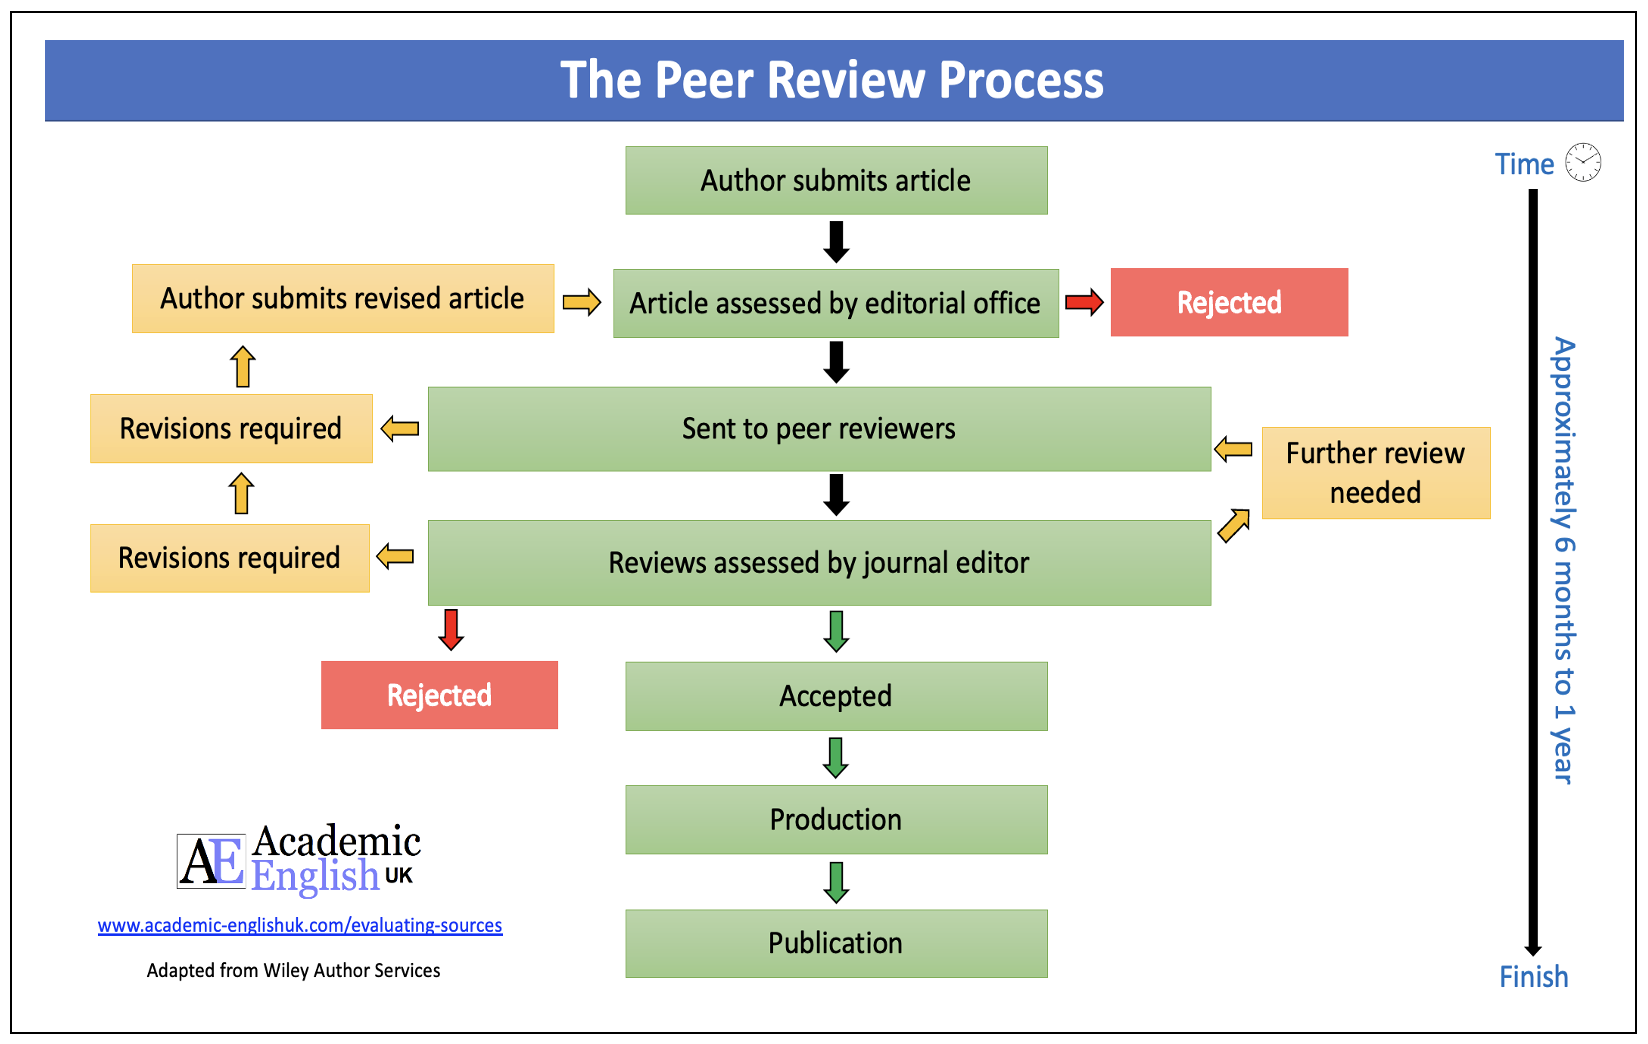 The Peer Review Process